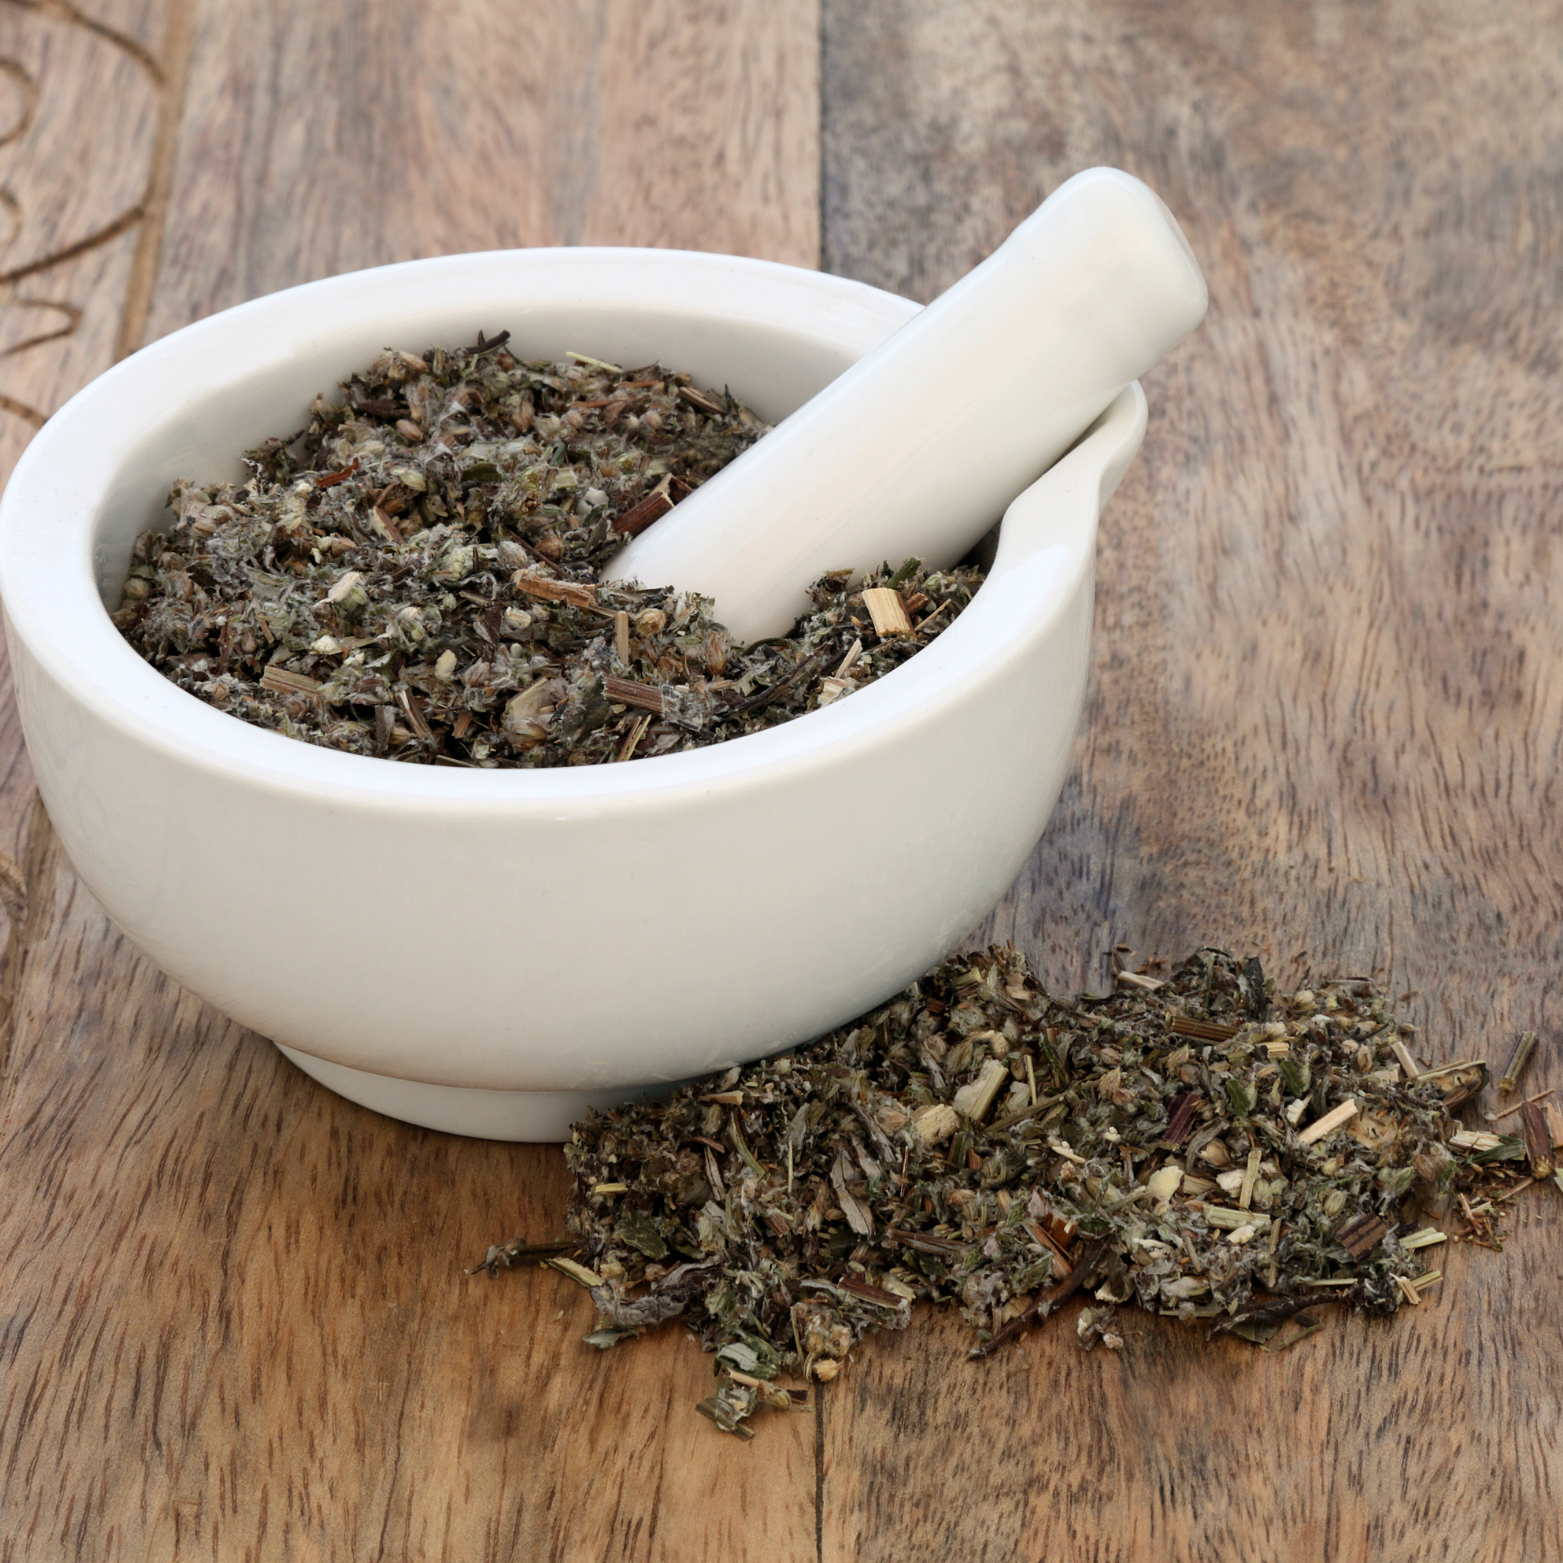 6 Best Smokable Herbs l Lavender, Mugwort and MORE!